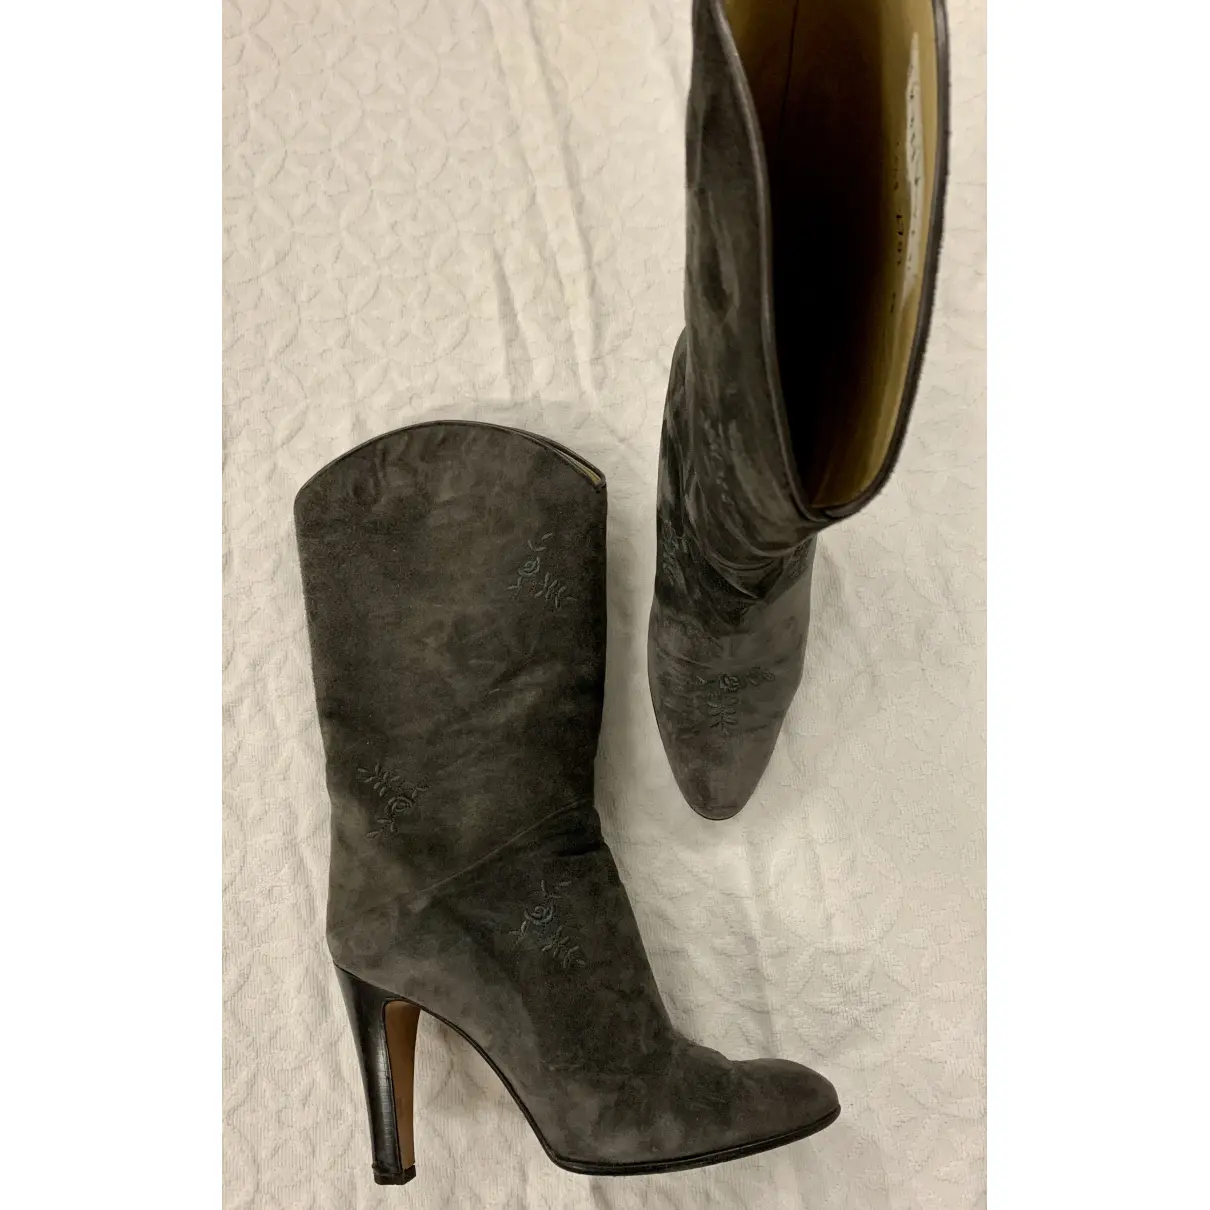 Buy Gianni Versace Leather riding boots online - Vintage